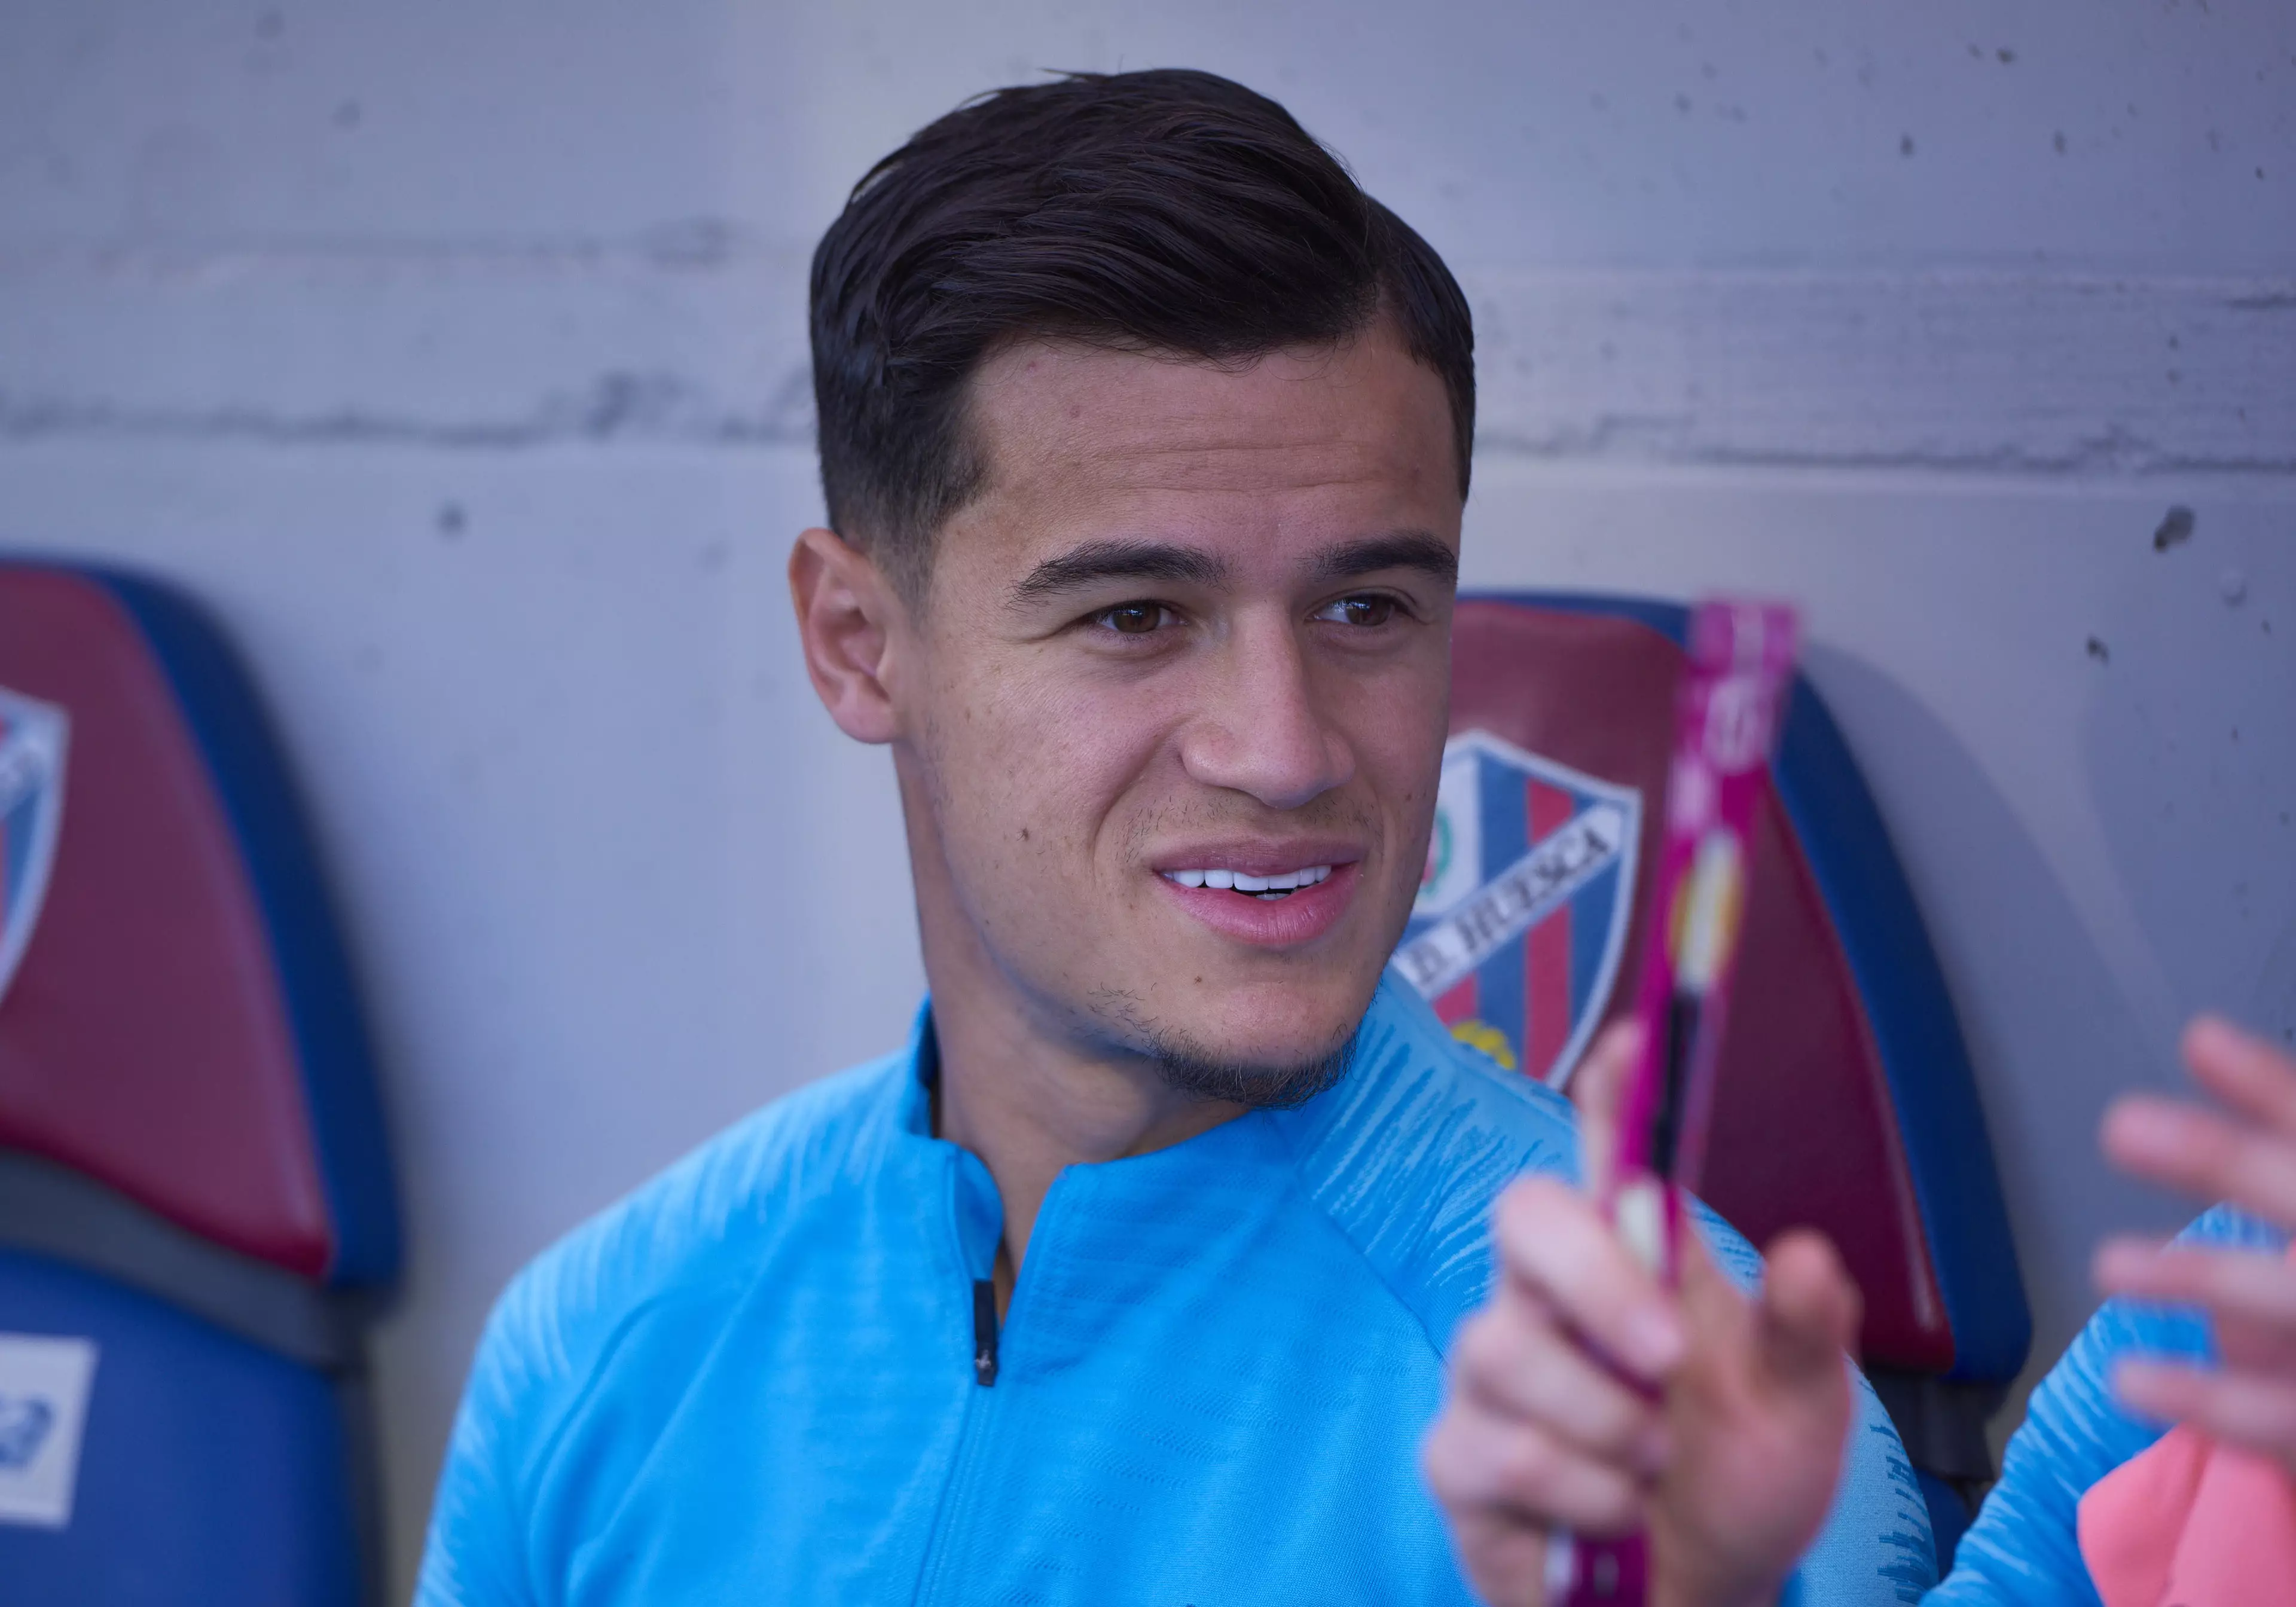 Life hasn't been great for Coutinho since moving to the Nou Camp. Image: PA Images